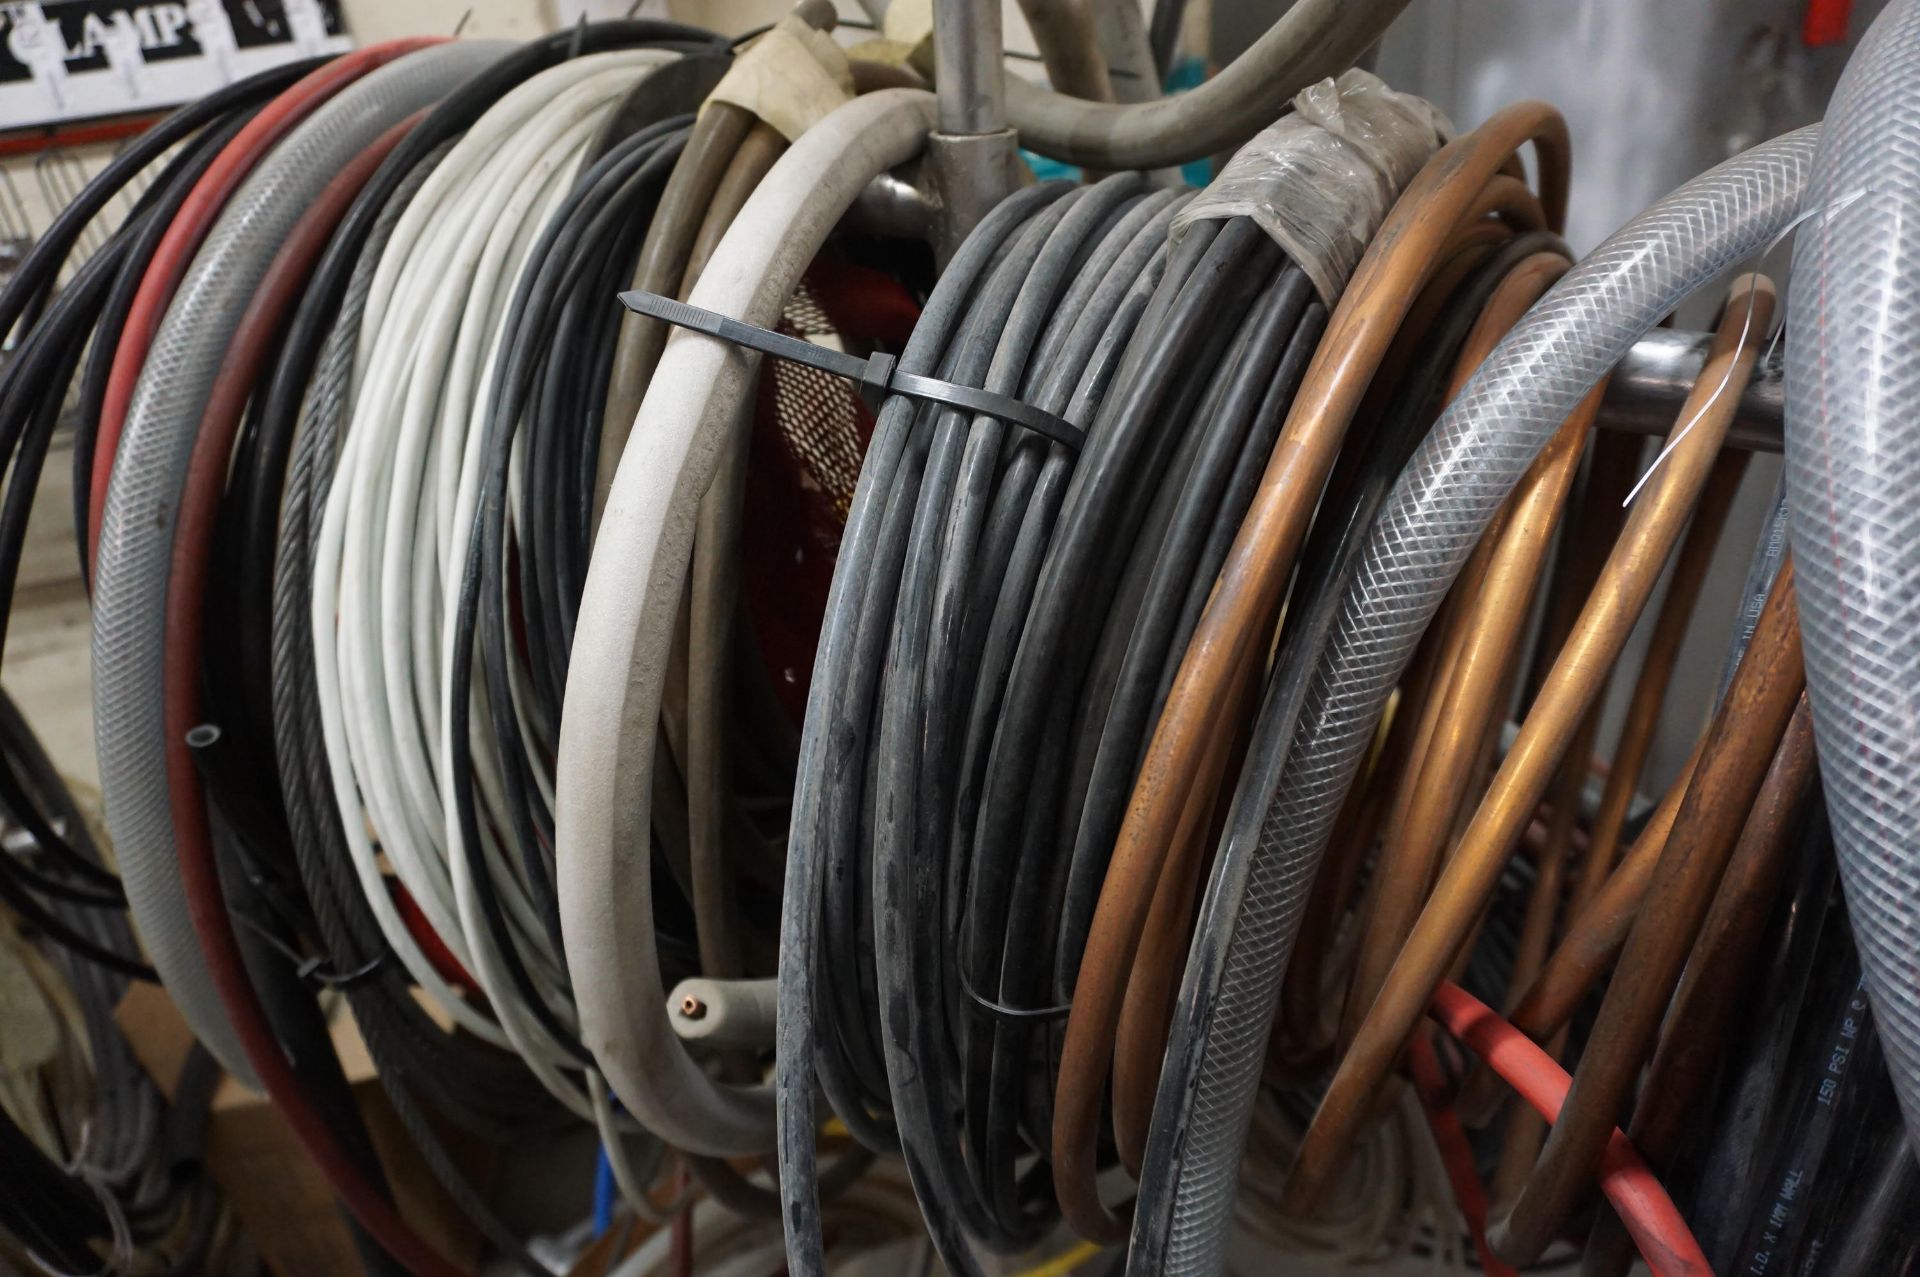 LOT TO INCLUDE: MISC. HOSES AND COPPER PIPING, HOSE SPOOLS, VARIED SIZES - Image 2 of 4